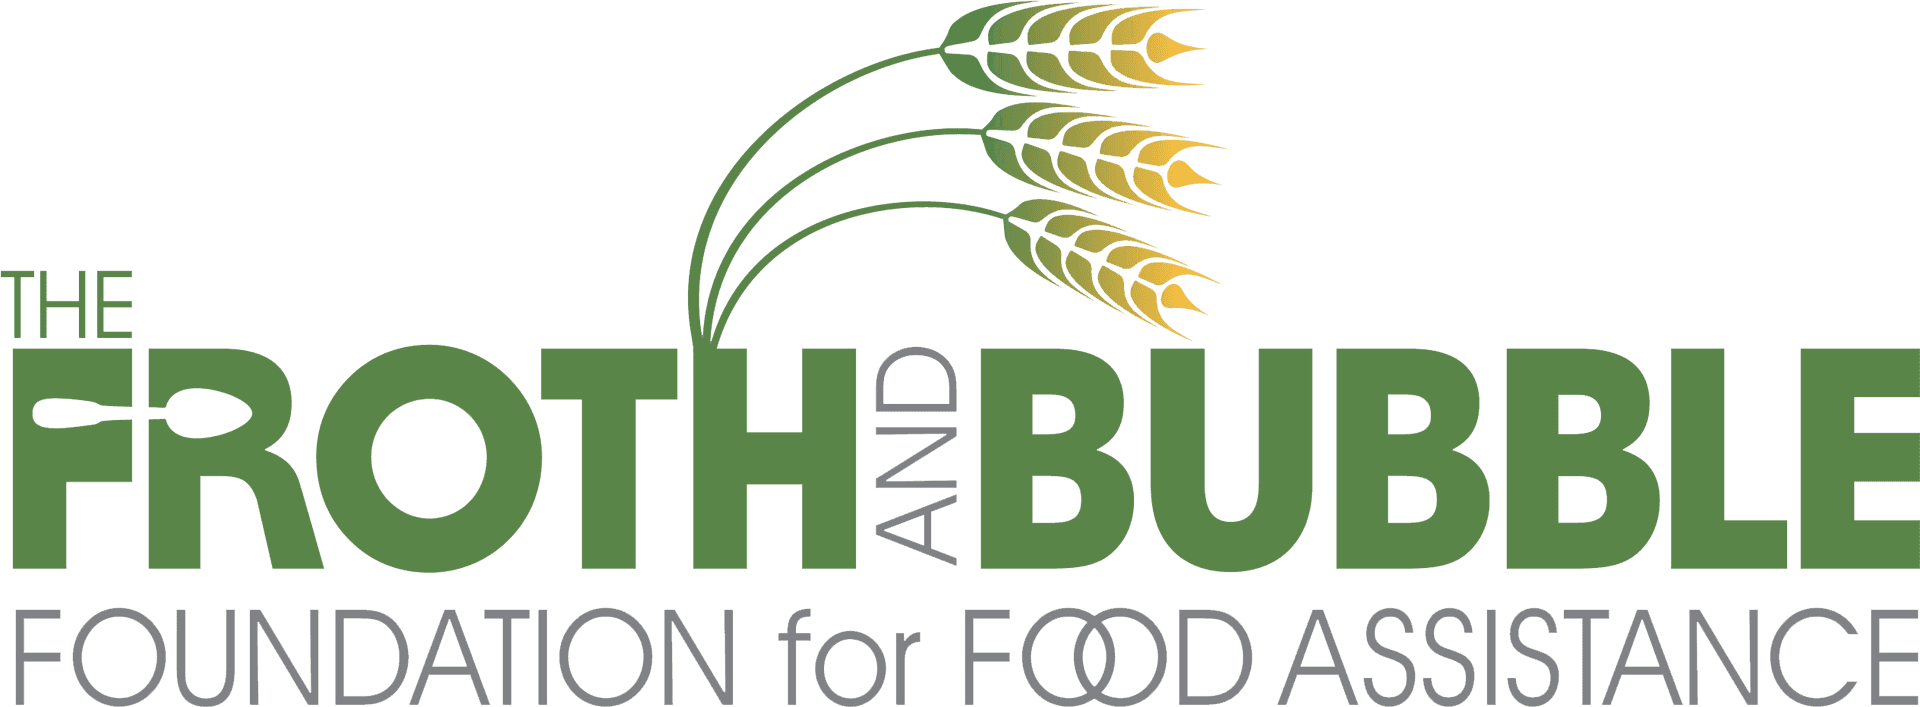 Froth And Bubble Food Assistance Foundation Logo PNG image